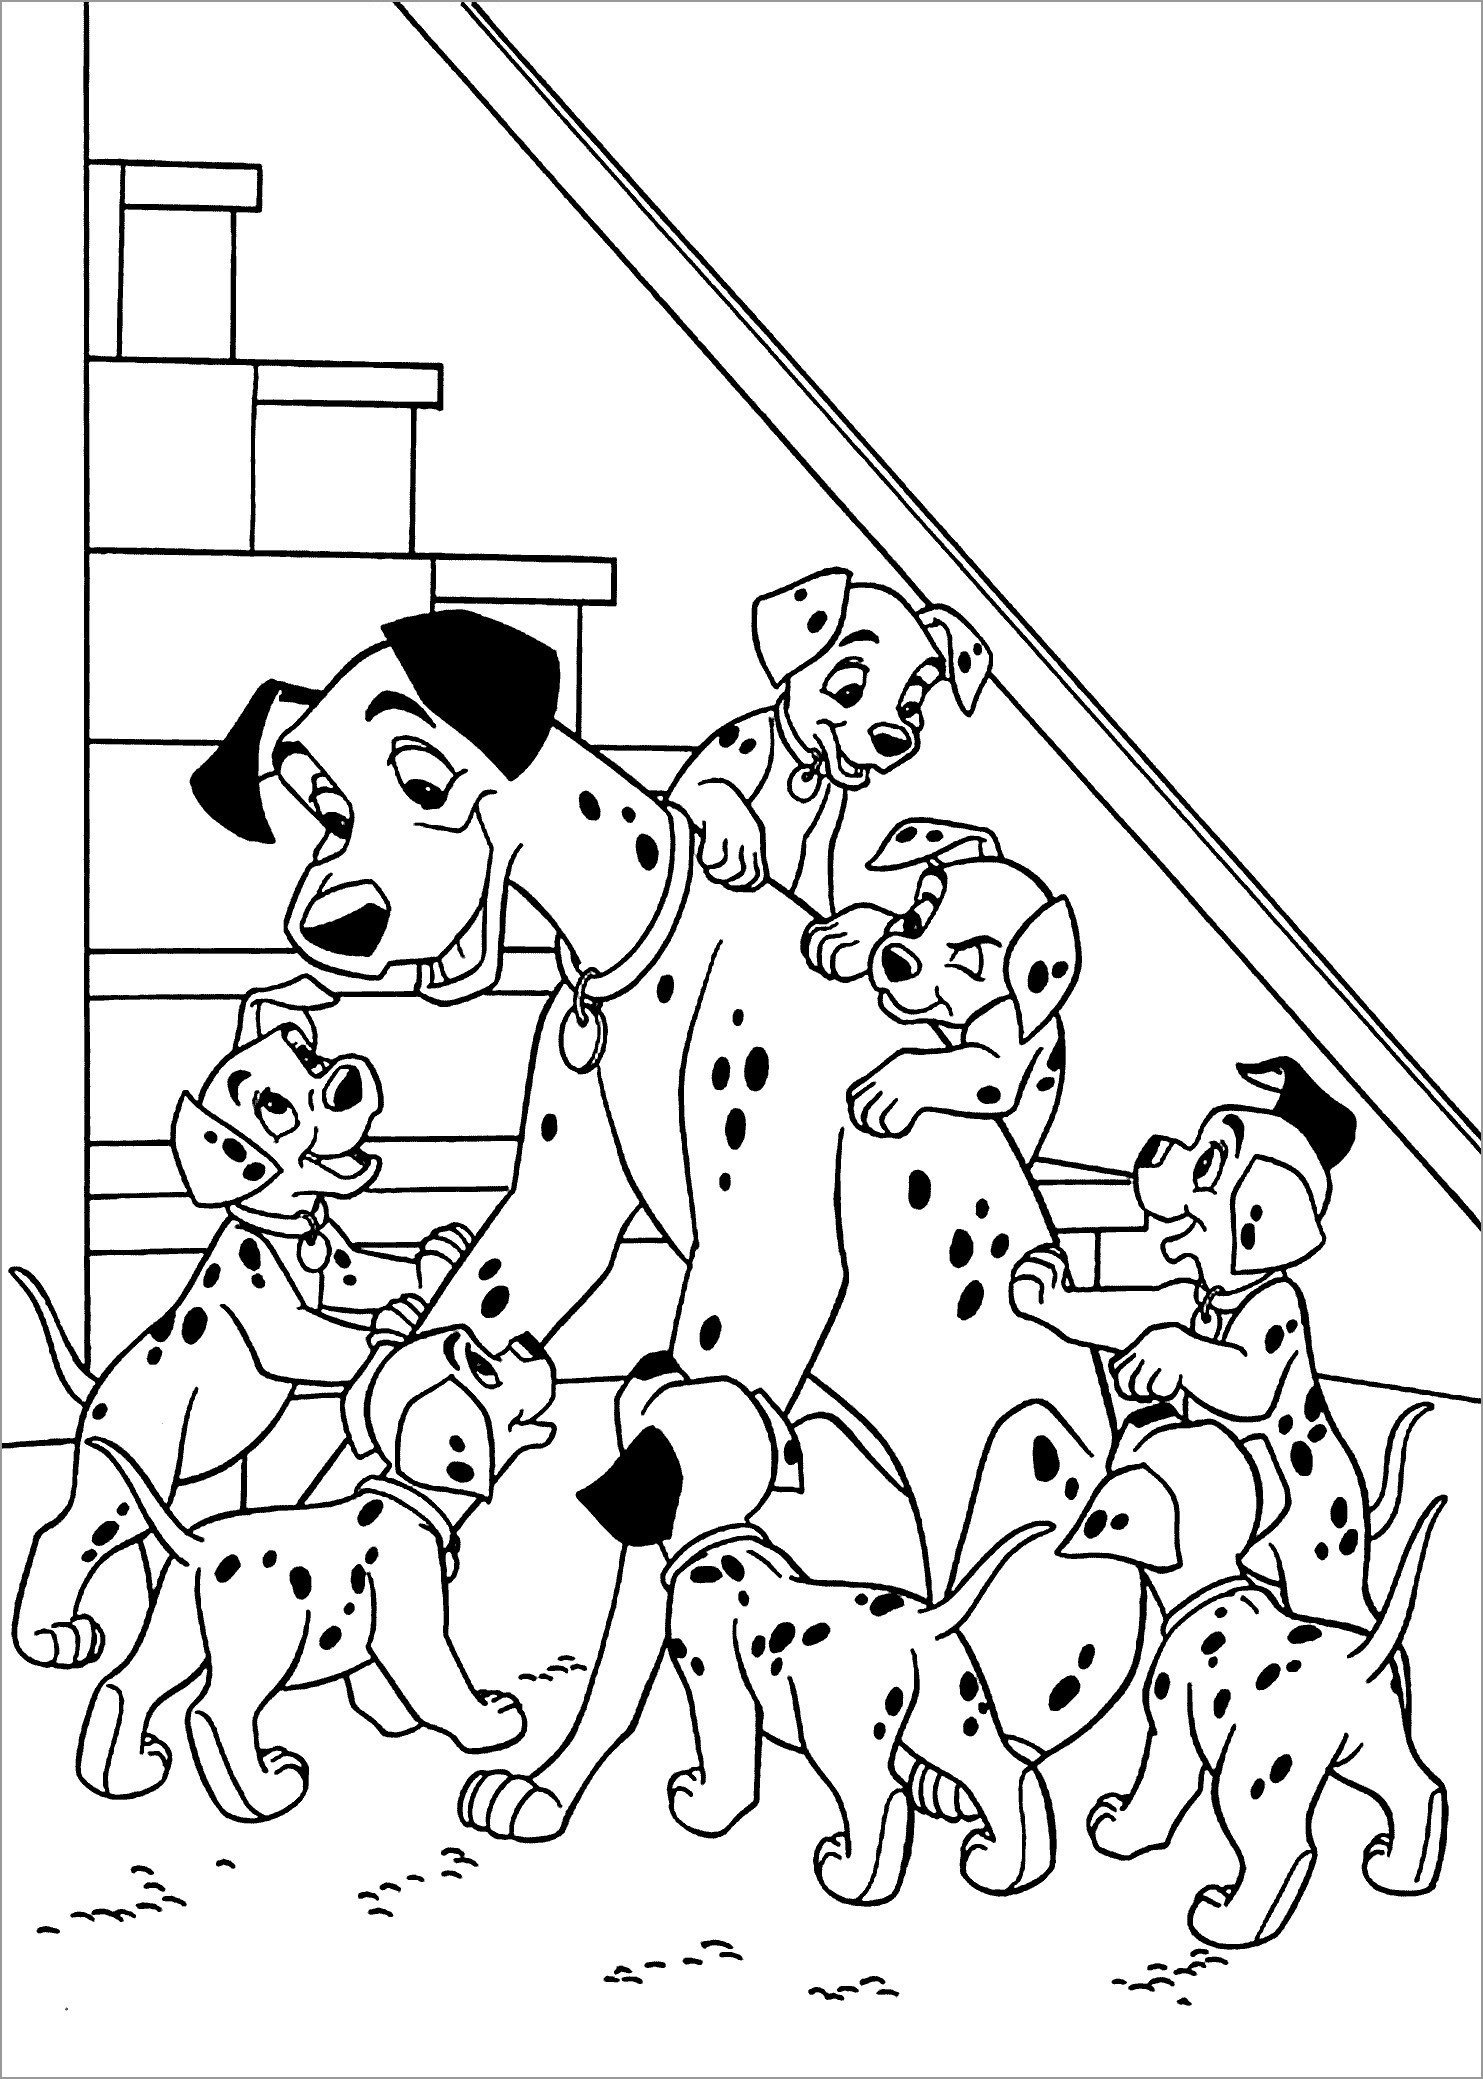 20 Dalmations Coloring Pages   Best Coloring Pages For Kids